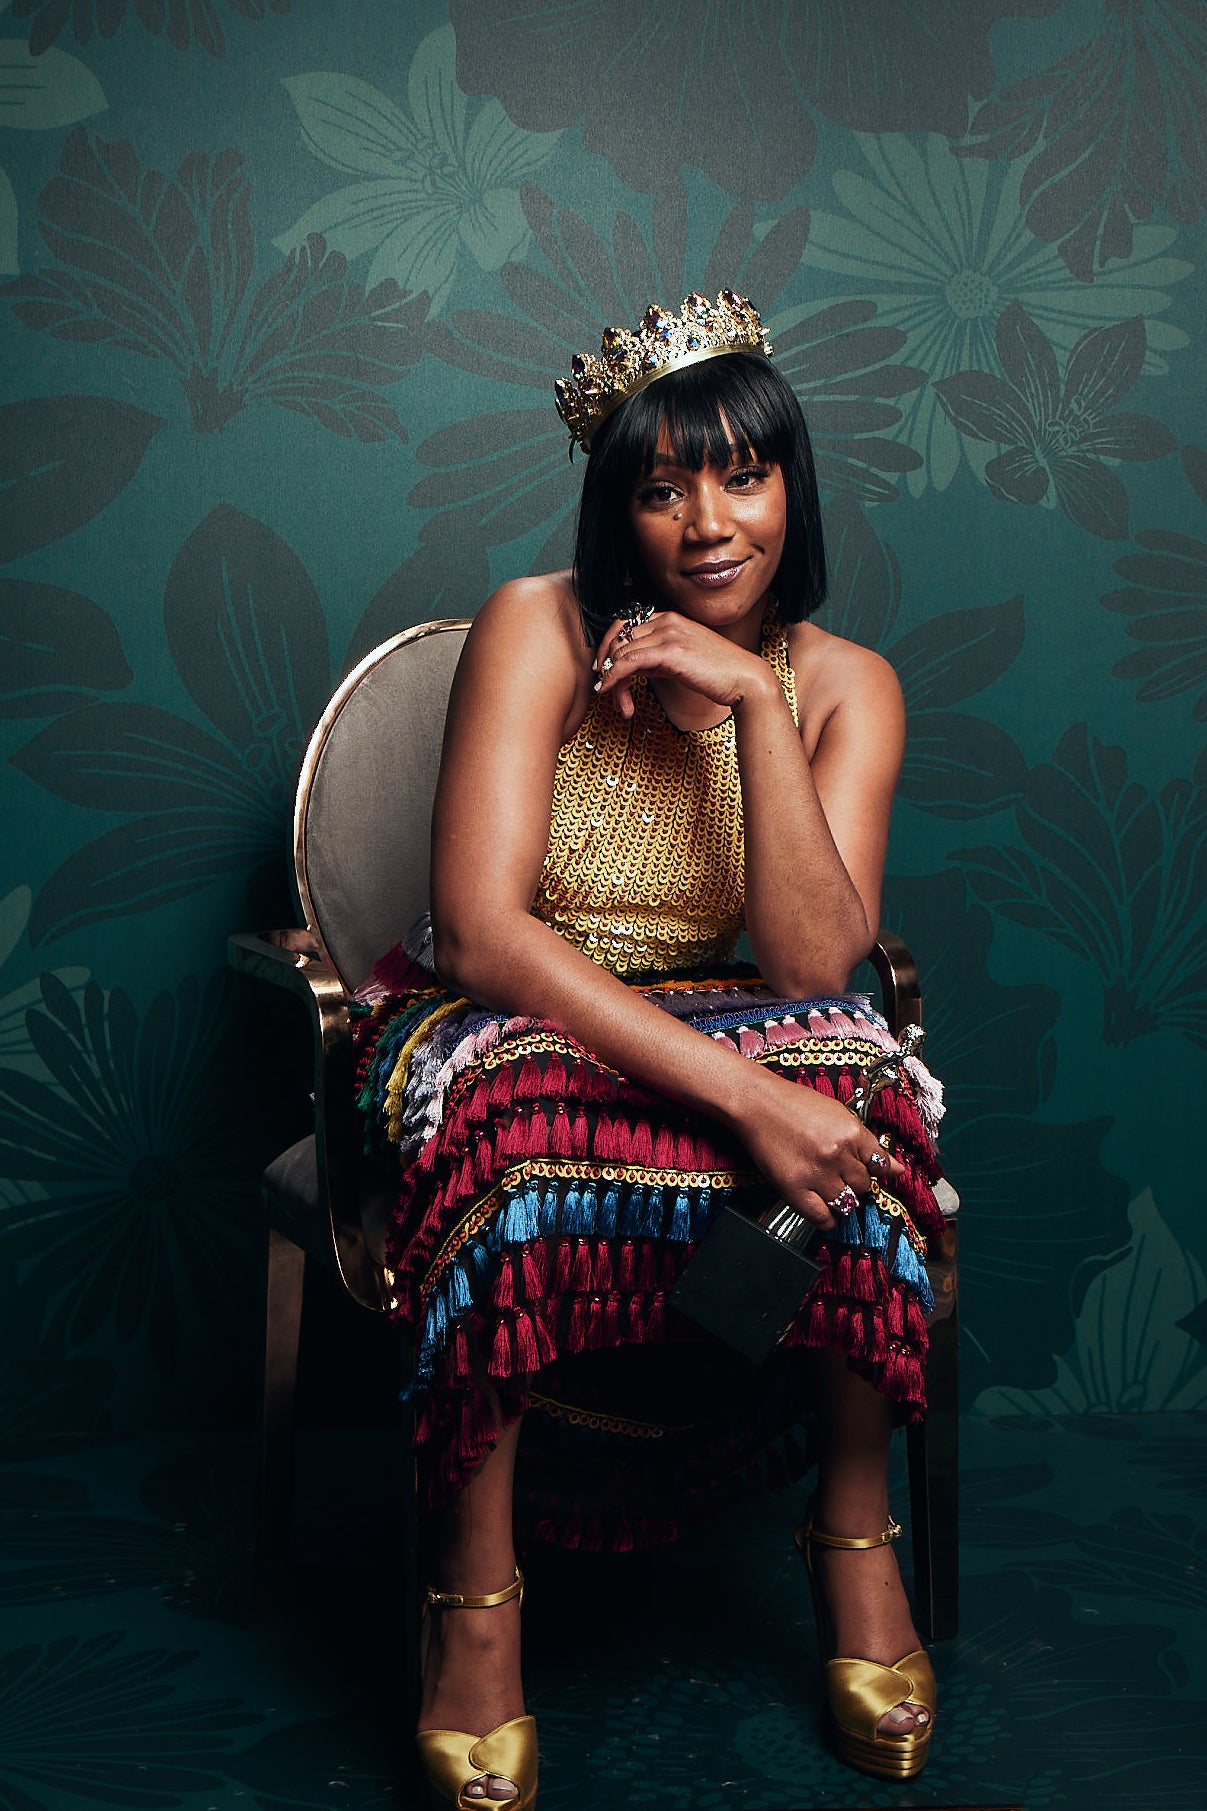 Tiffany Haddish Is Joining The Hollywood Confidential Panel Series For A Candid Conversation You Won't Want To Miss
